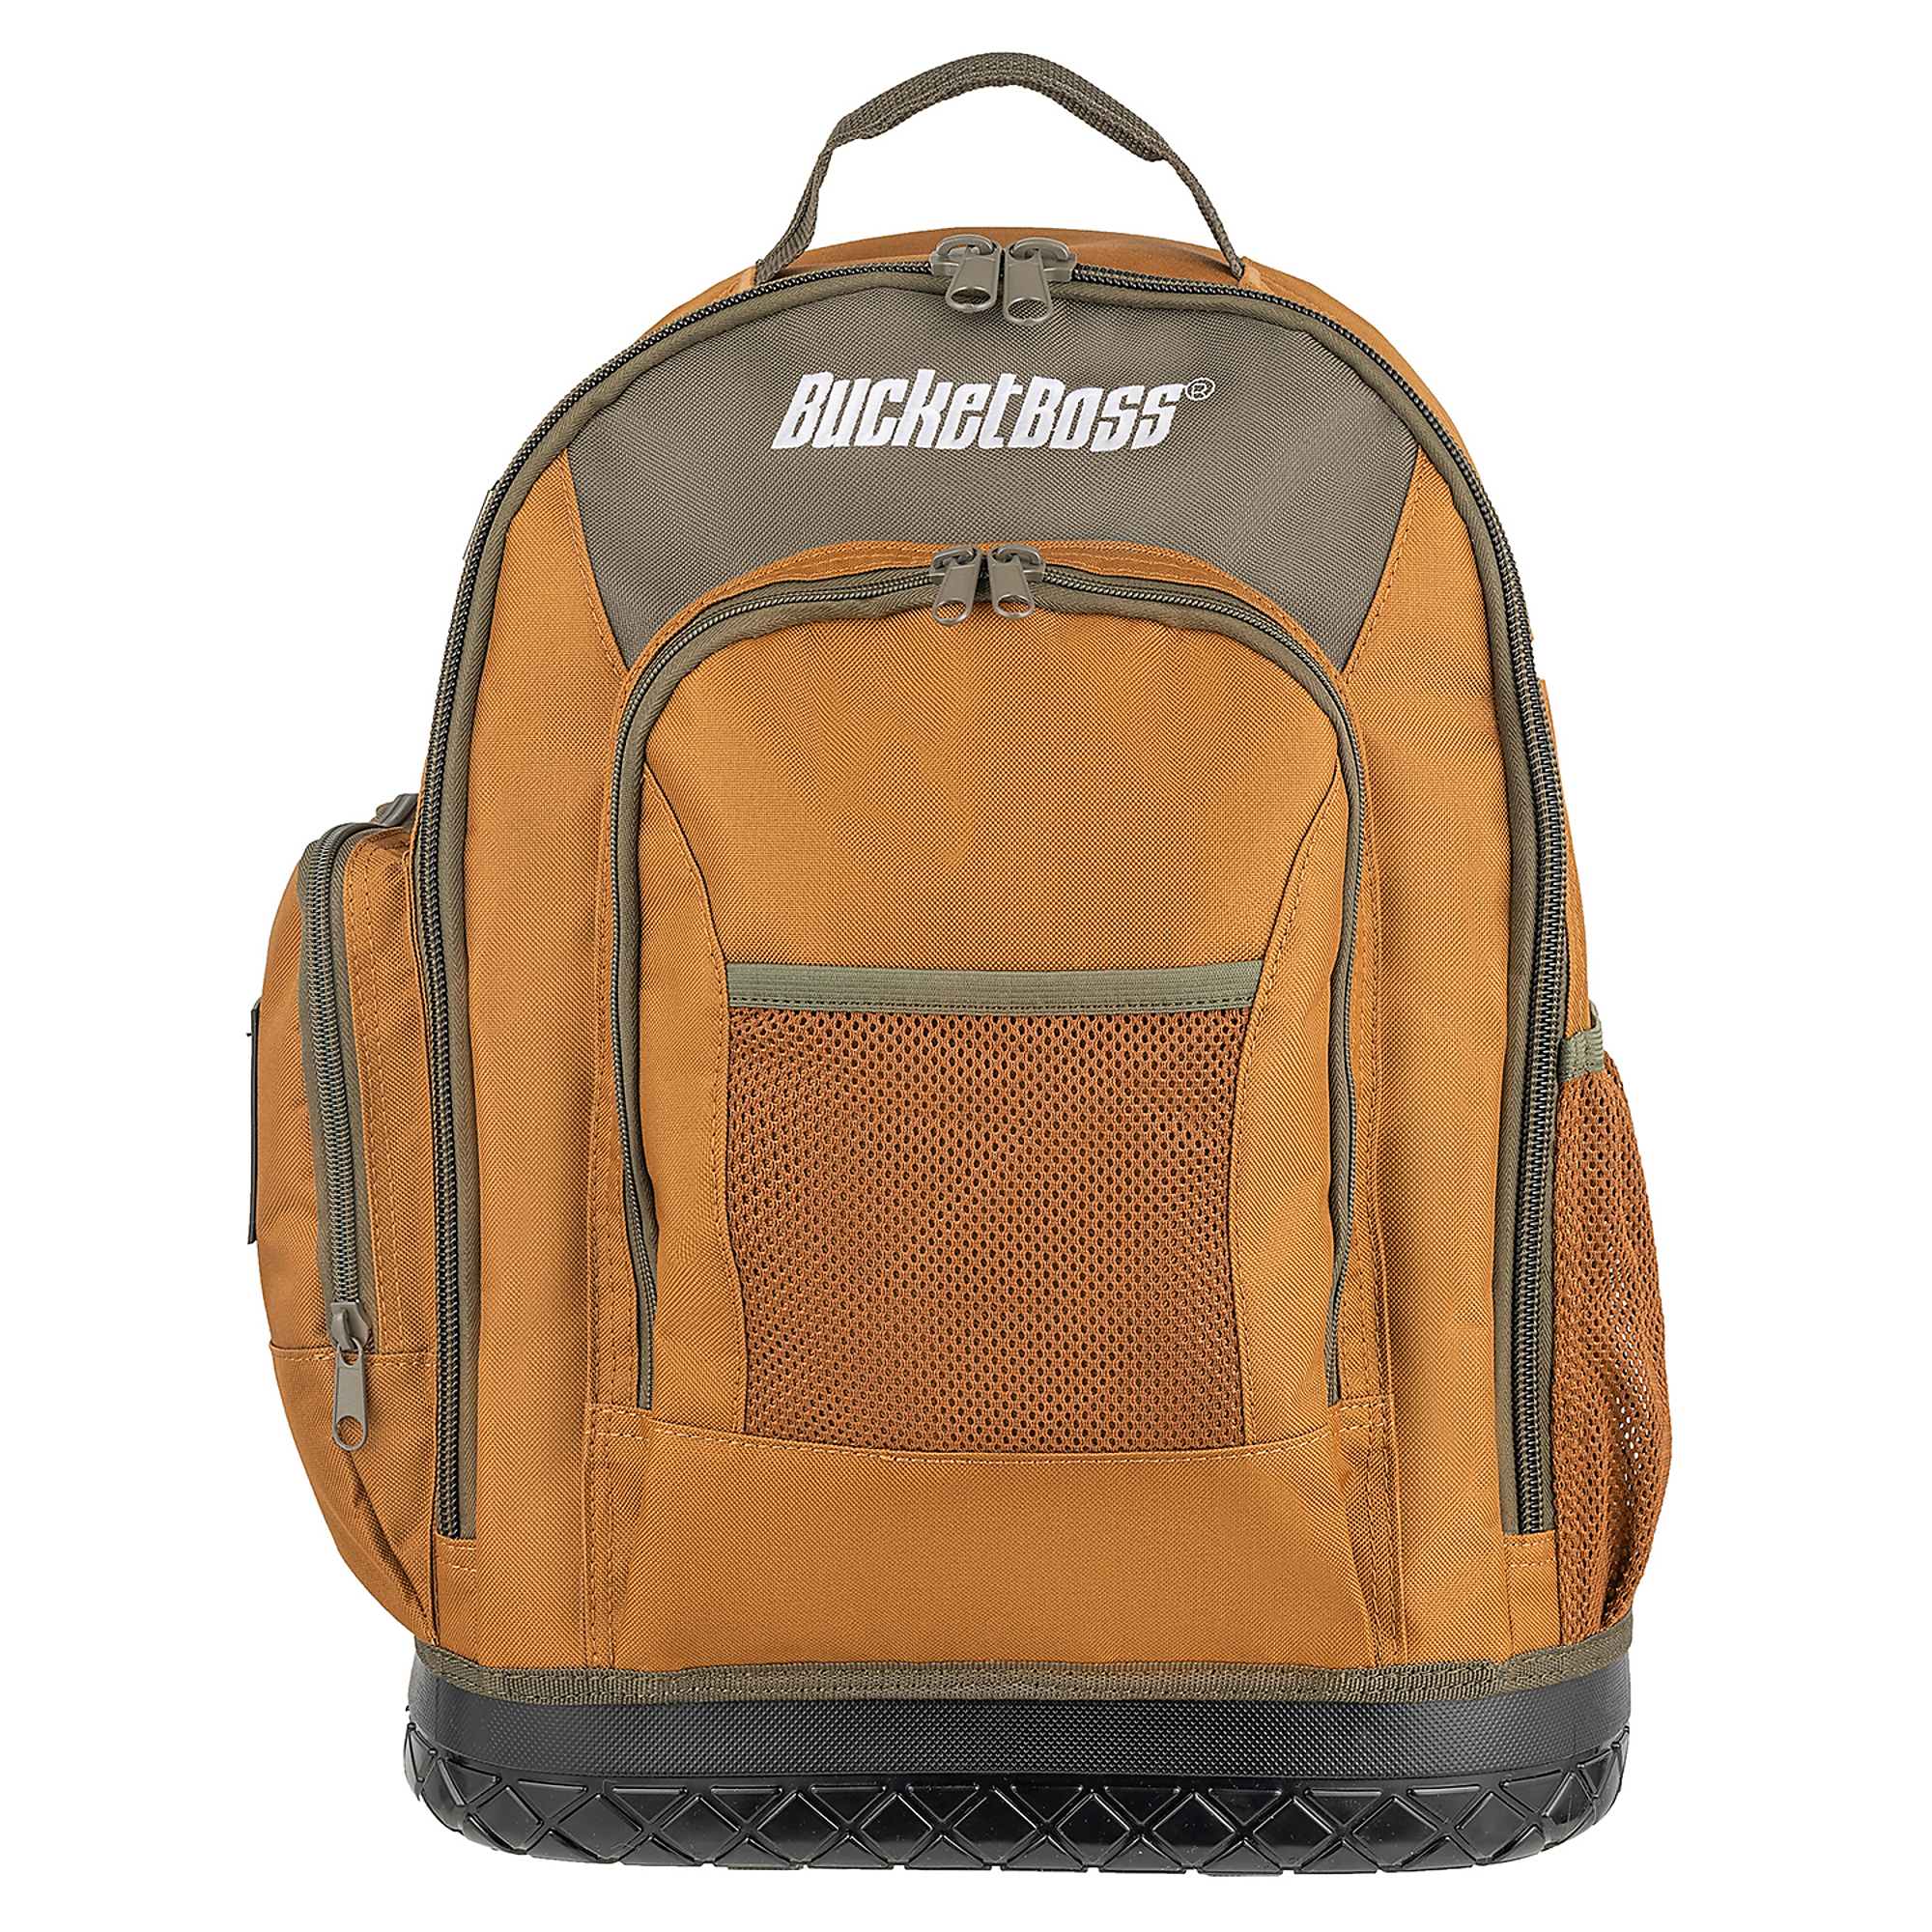 Bucket Boss, PRO TOOL BACKPACK, Color Brown, Pockets (qty.) 24 Material Poly, Model 65157